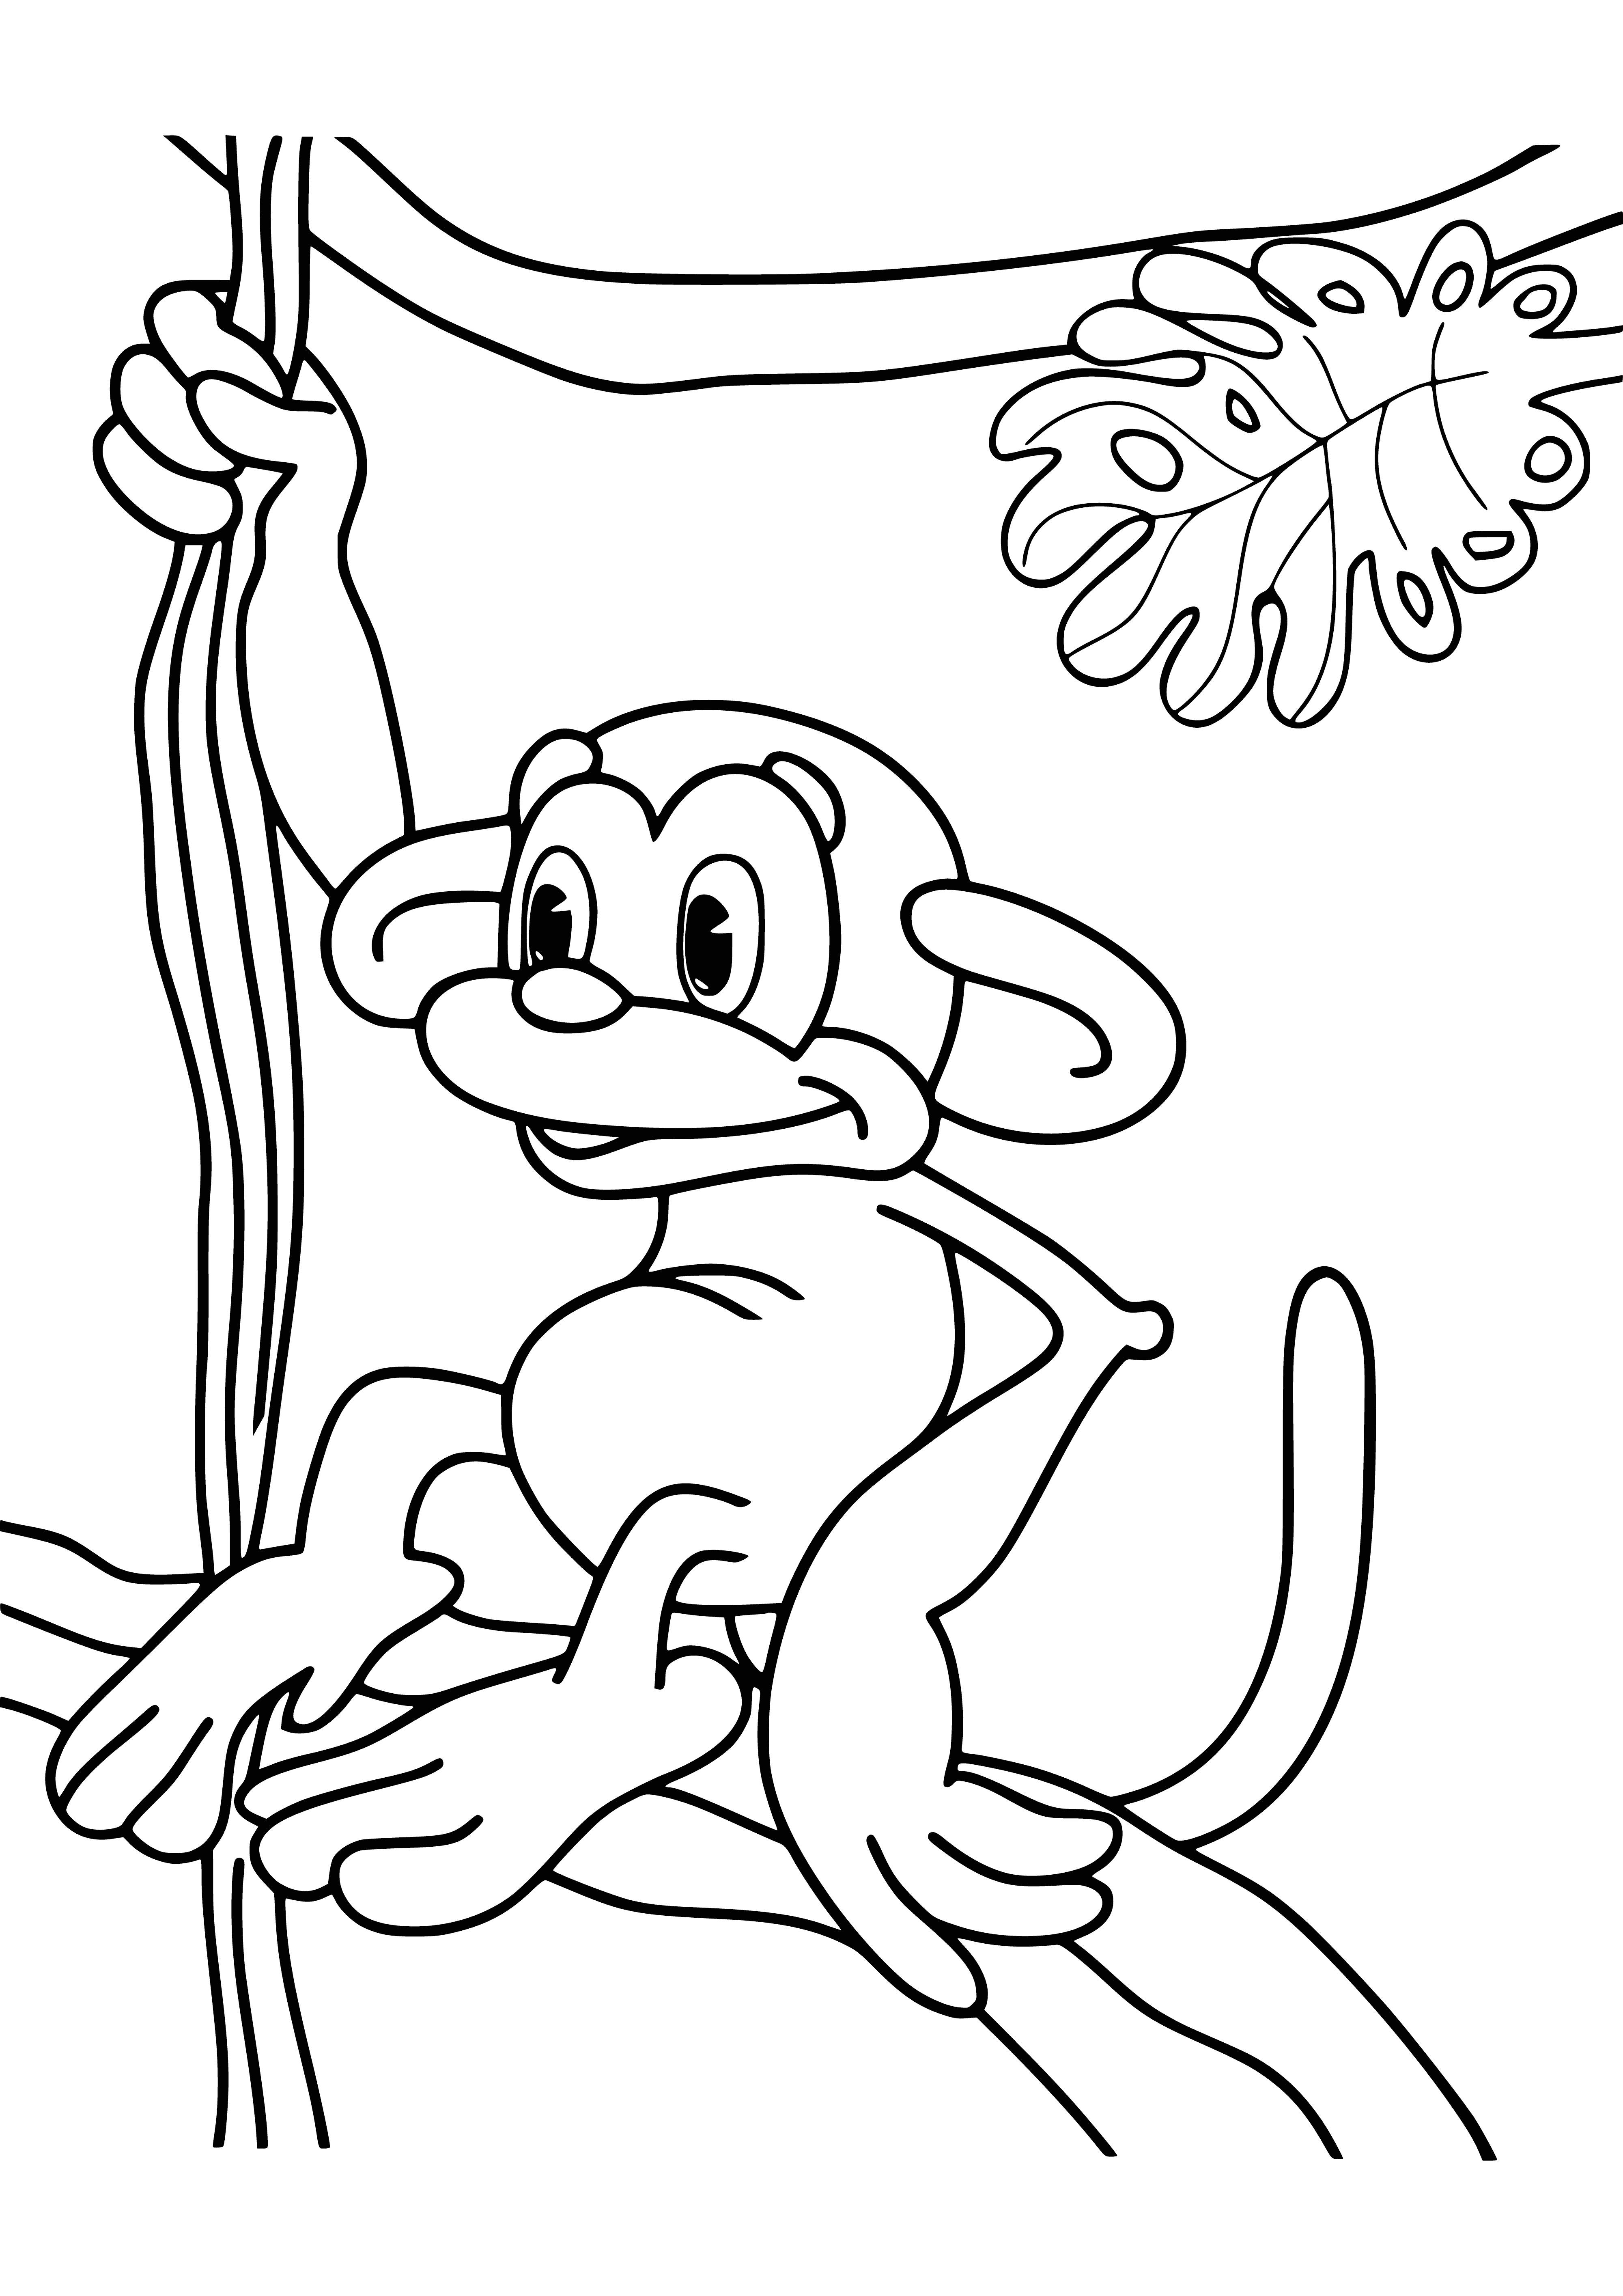 coloring page: Monkey mom carries baby in her arms while climbing a tree with long tail. #CuteAnimals #Mammoth